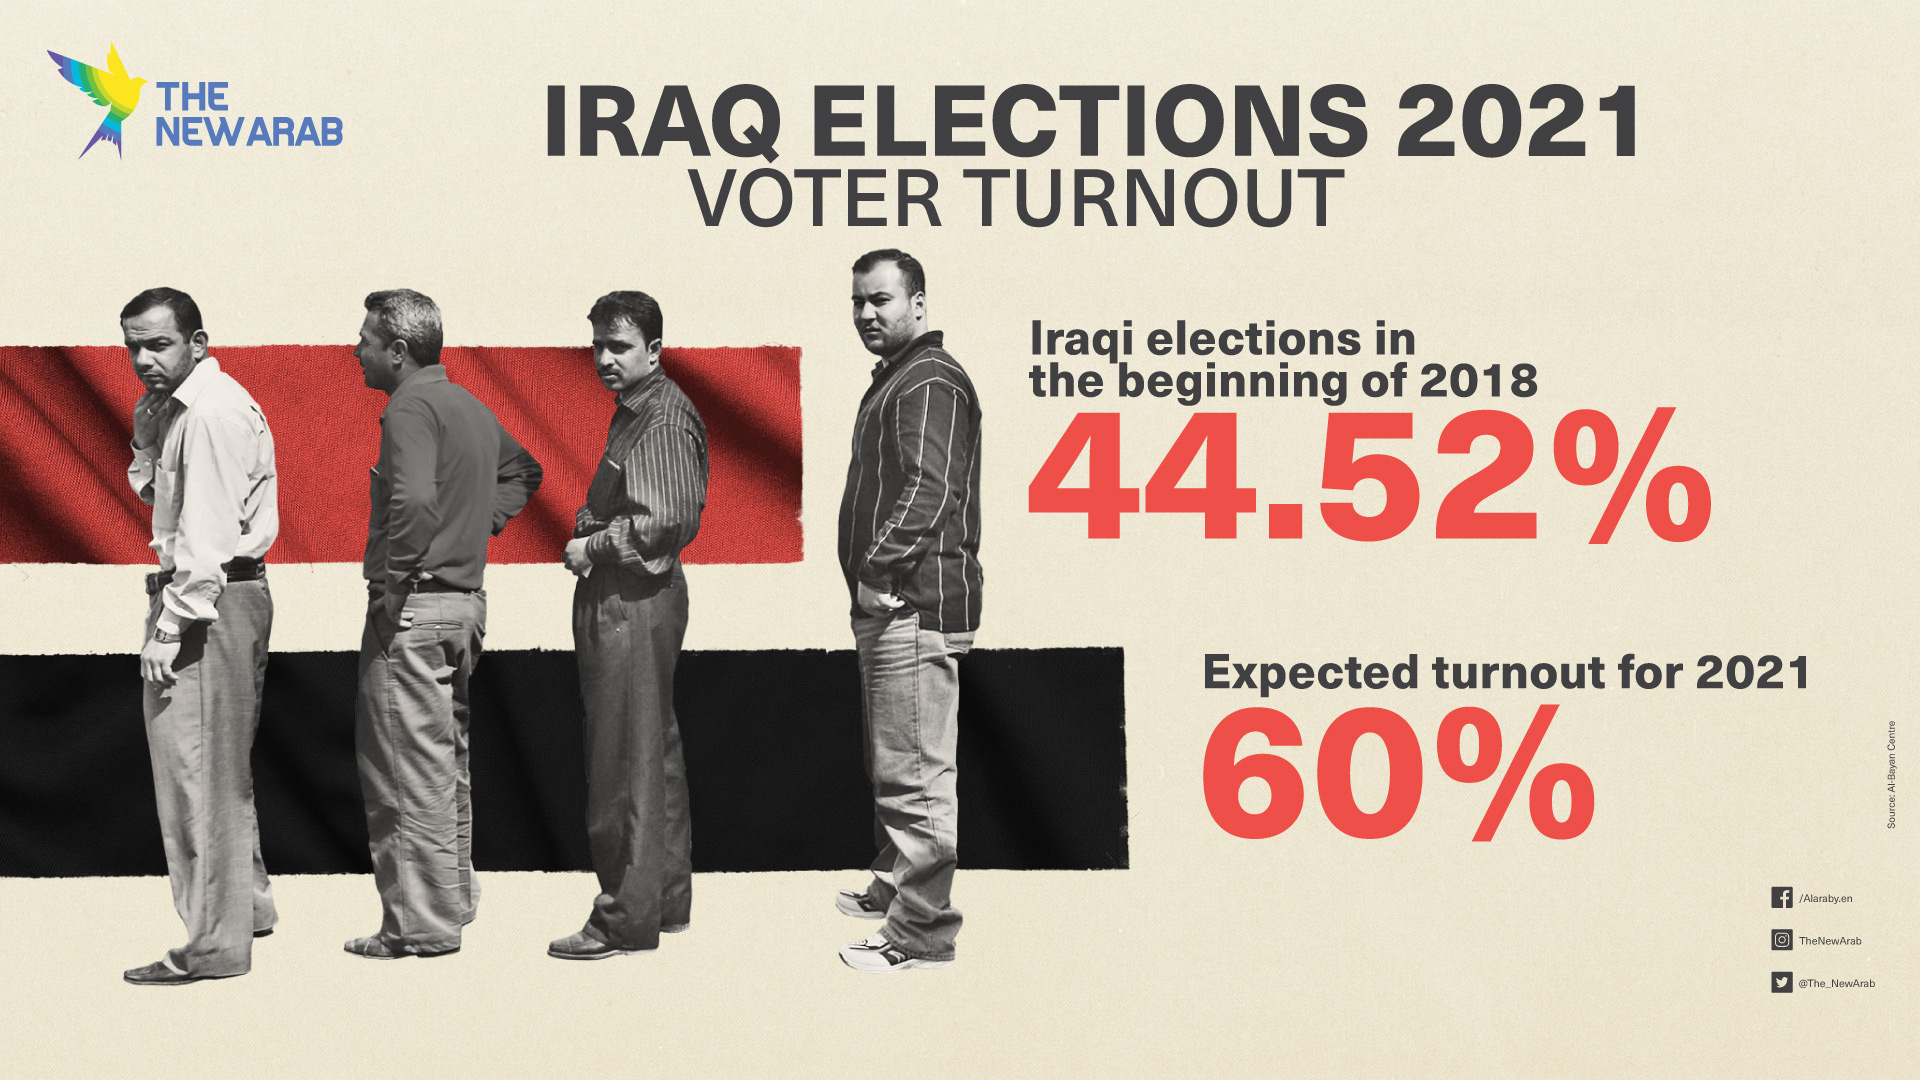 Infographic: Iraqi Elections voter turnout 